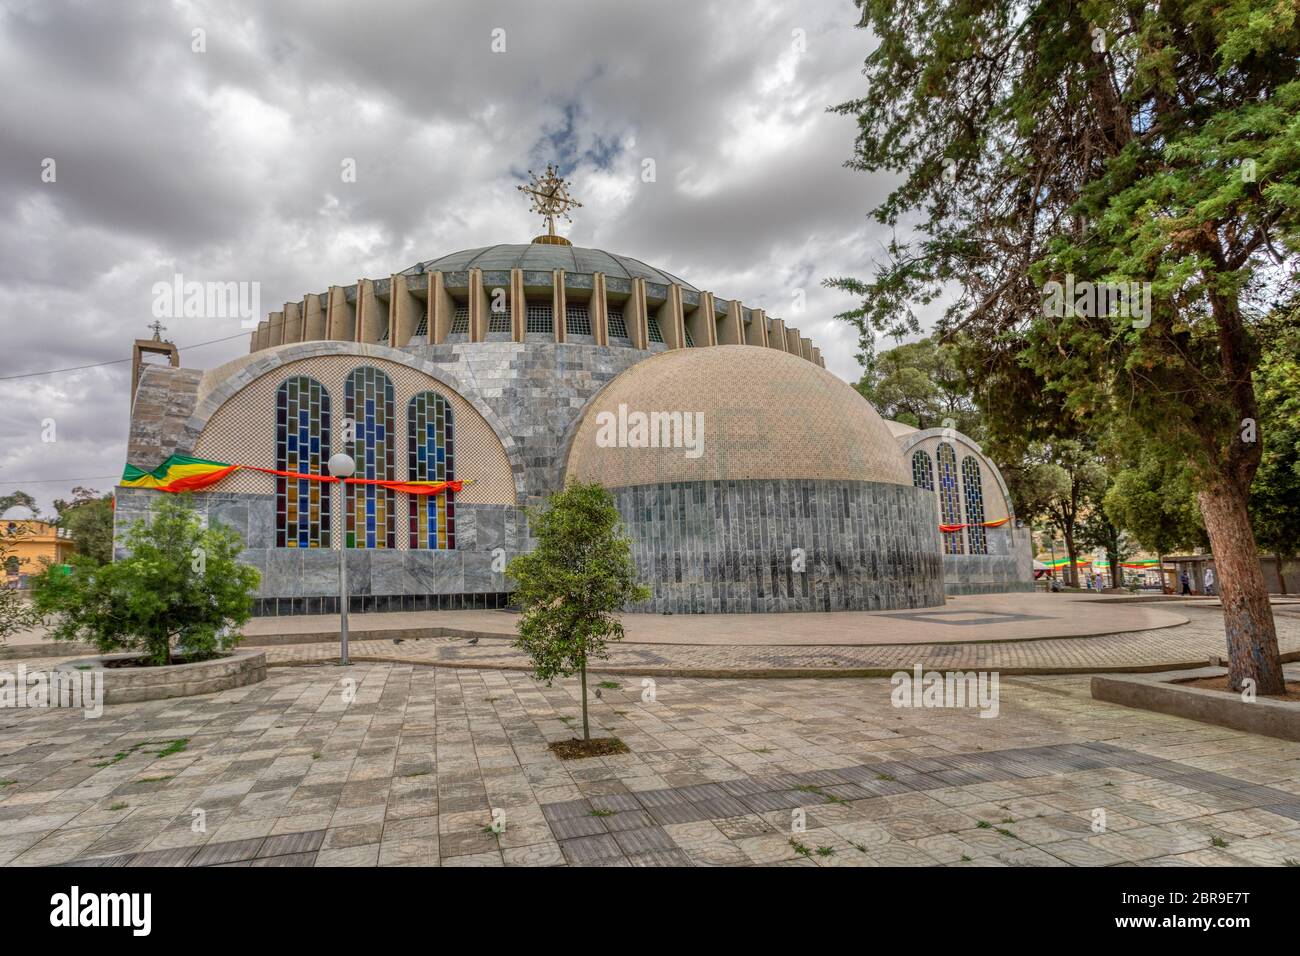 Famous cultural heritage Church of Our Lady of Zion in Axum. Ethiopian Orthodox Tewahedo Church built by Emperor Haile Selassie in the 1950s. Stock Photo